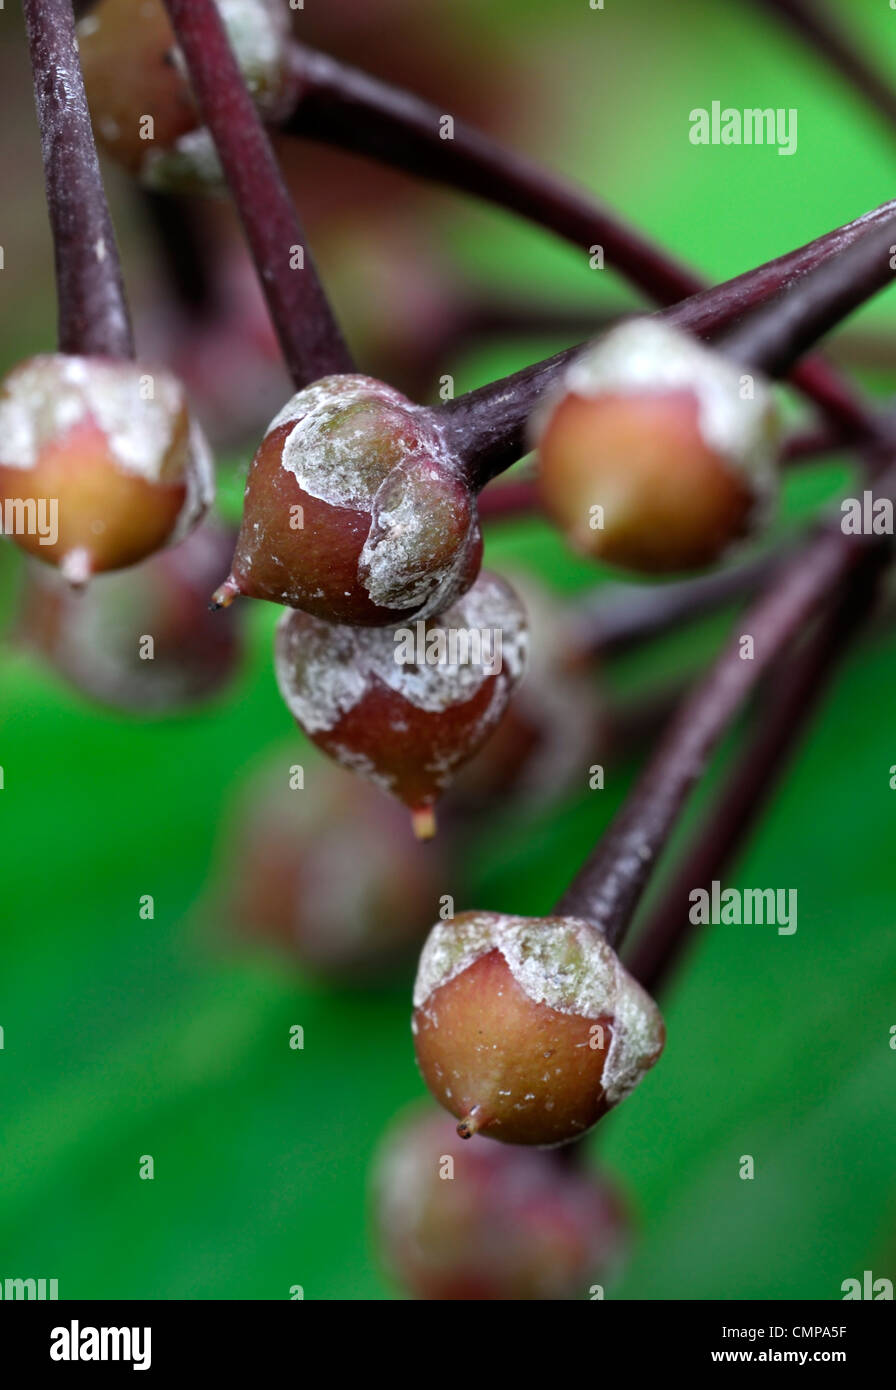 ardisia humilis brown fruit fruiting body seedpod architectural interest jet berry berries Stock Photo